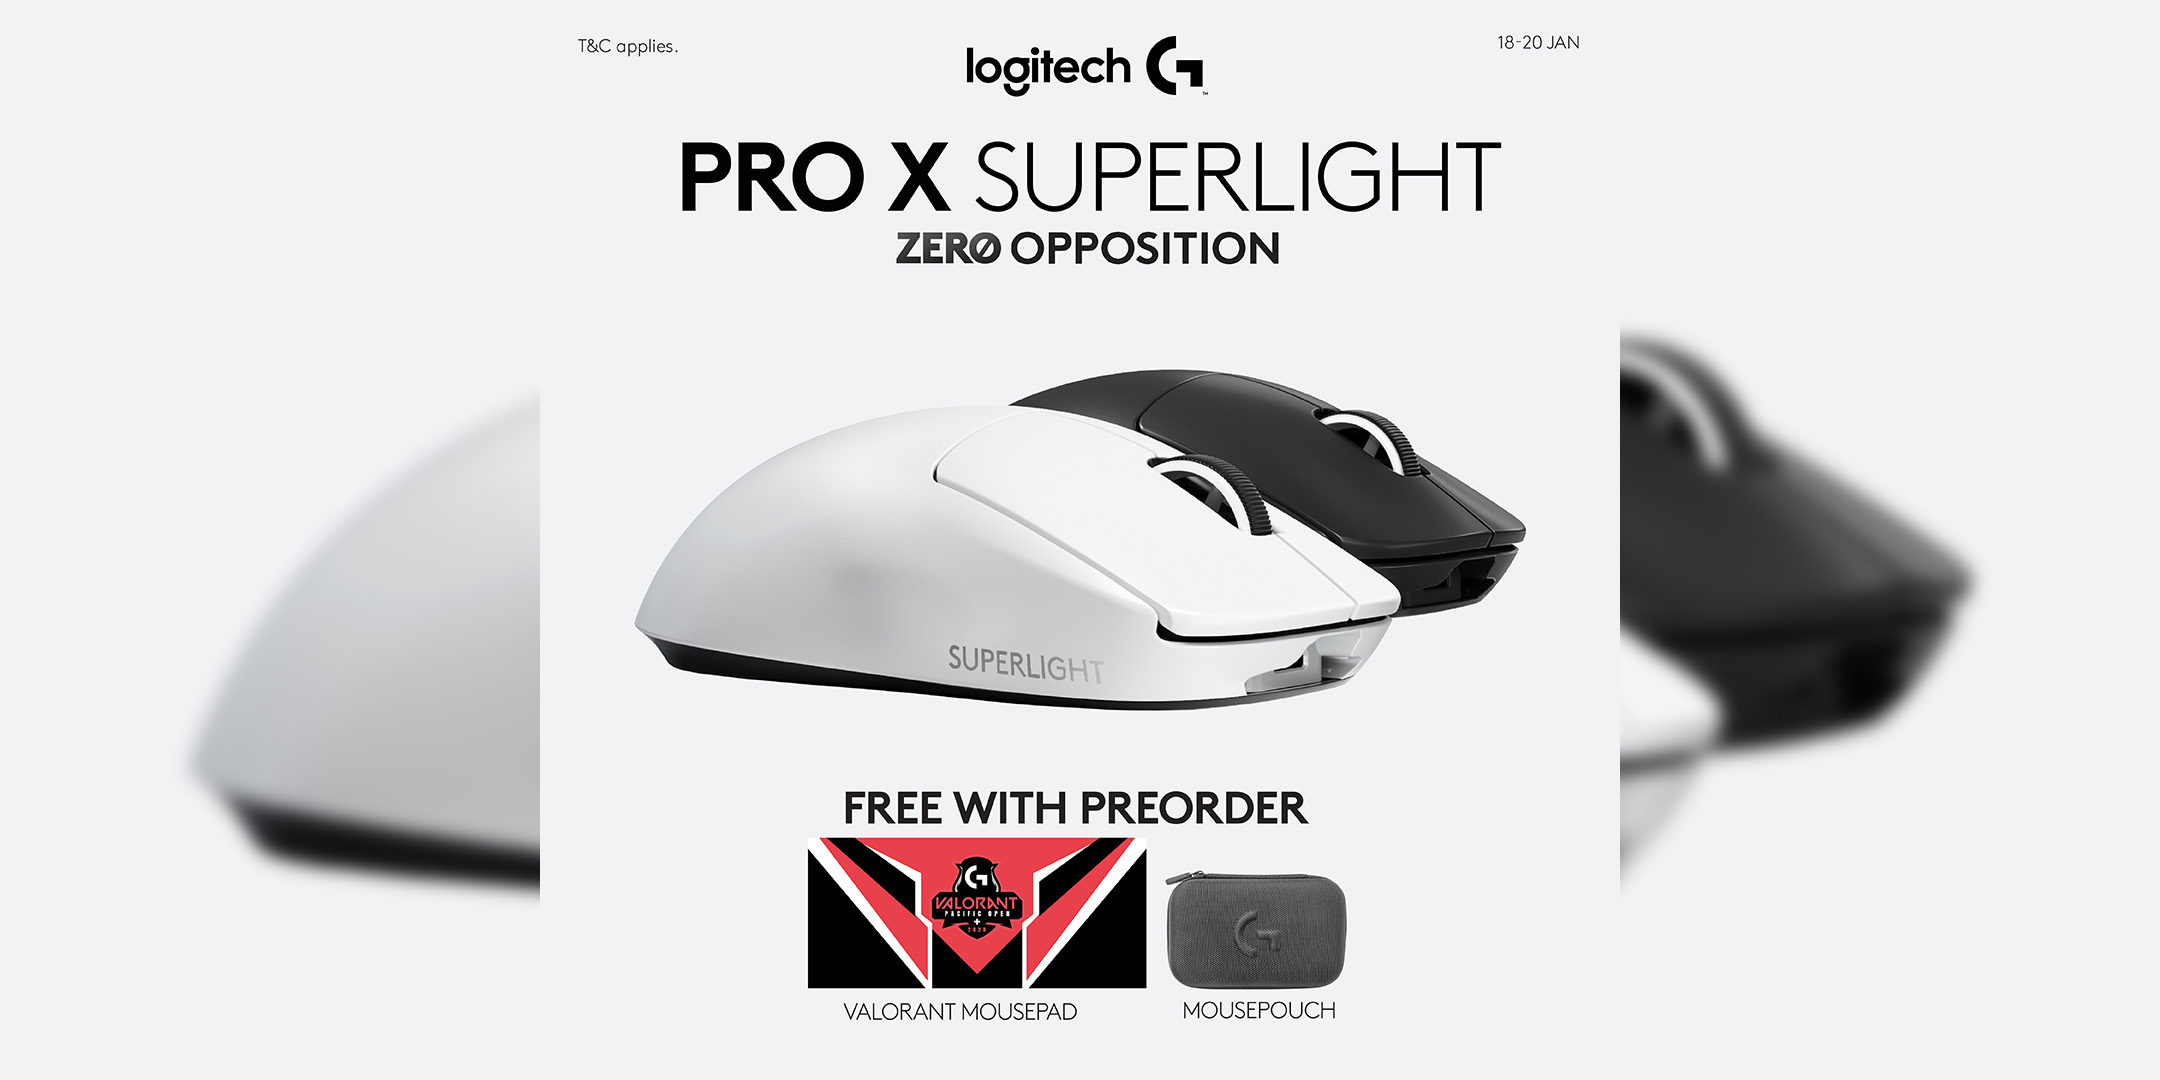 Logitech G PRO X SUPERLIGHT lightweight wireless gaming mouse announced at RM649; Free mousepad and mouse for preorders